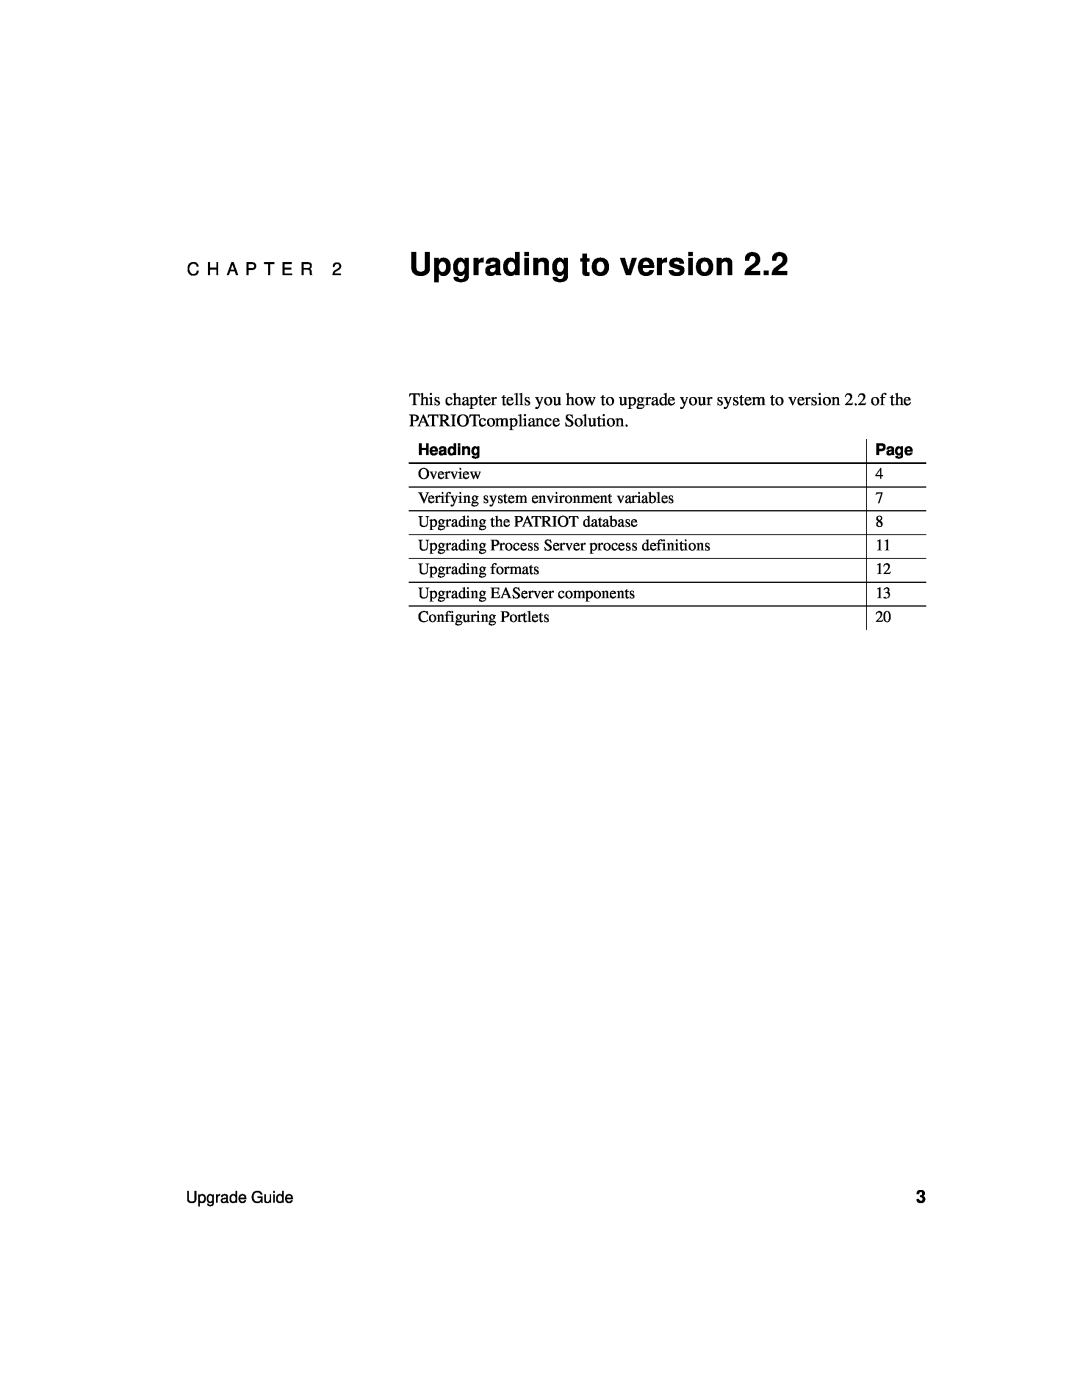 Sybase Version 2.2 manual C H A P T E R 2 Upgrading to version, PATRIOTcompliance Solution, Heading, Page 